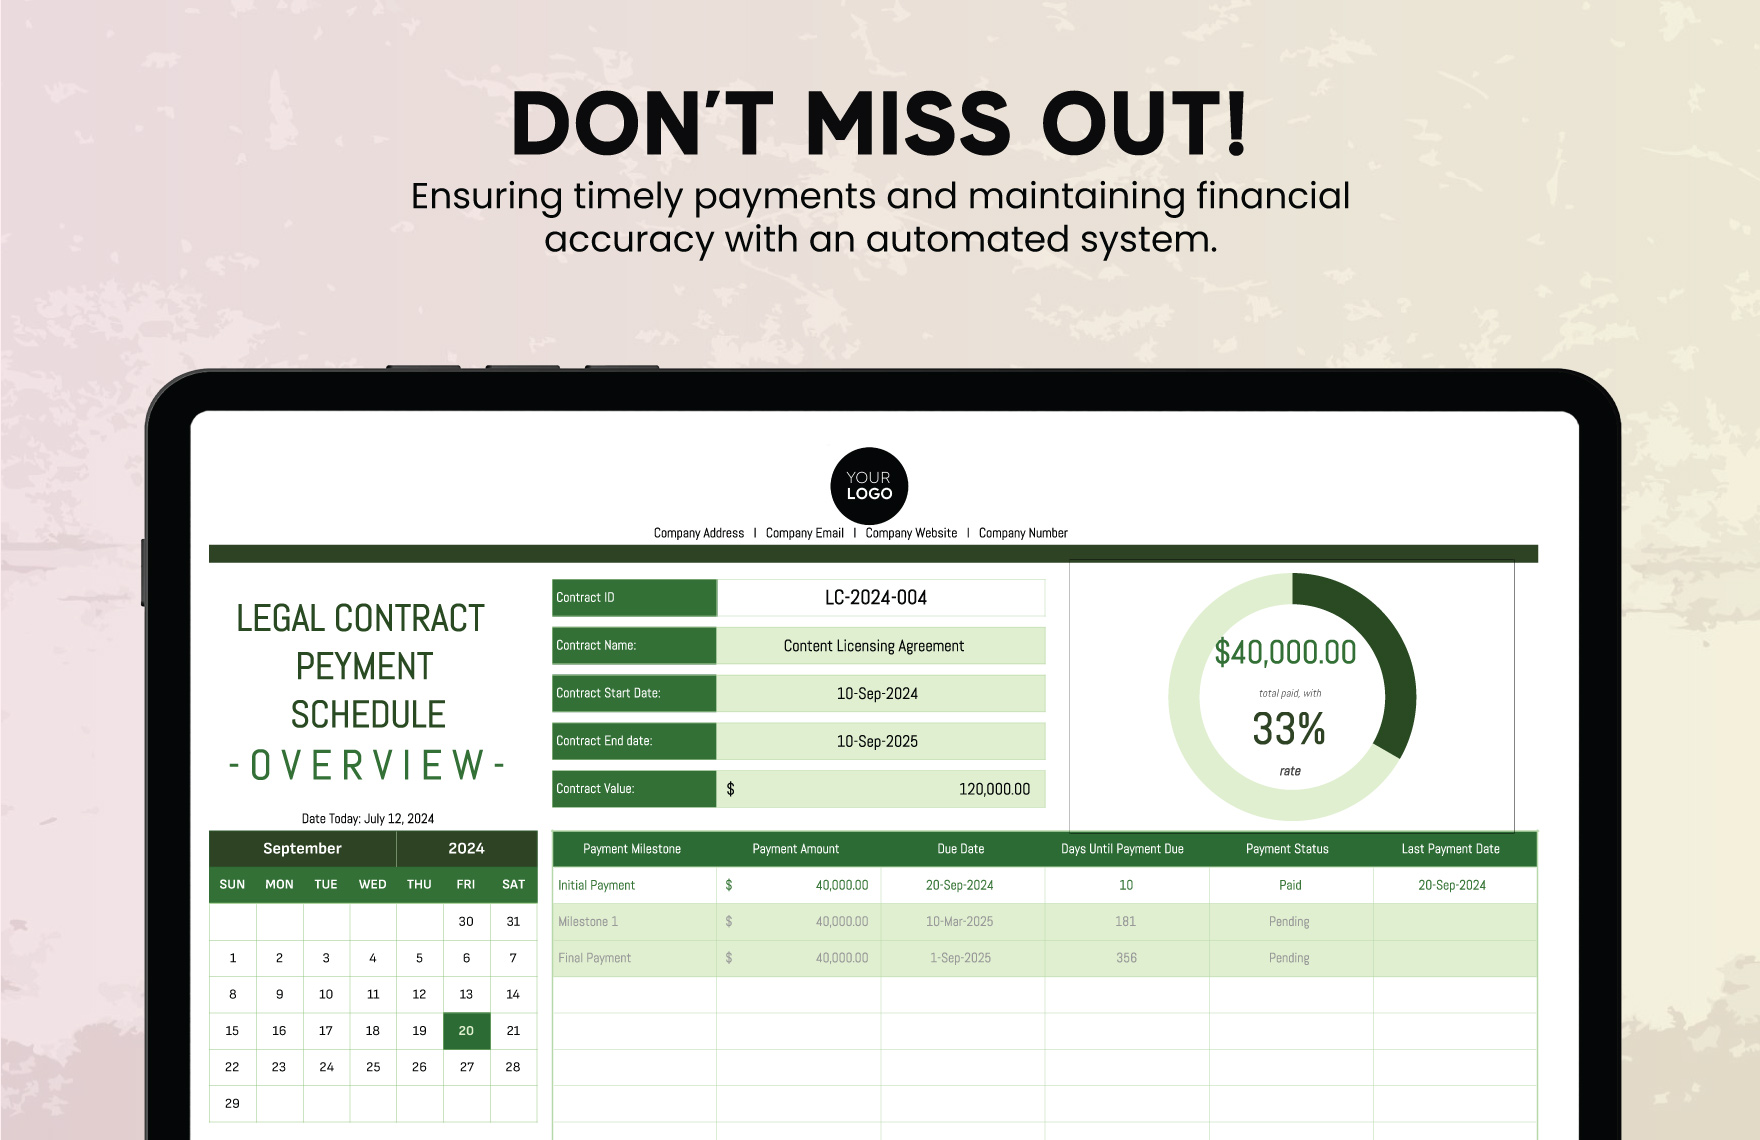 Legal Contract Payment Schedule Automation Template